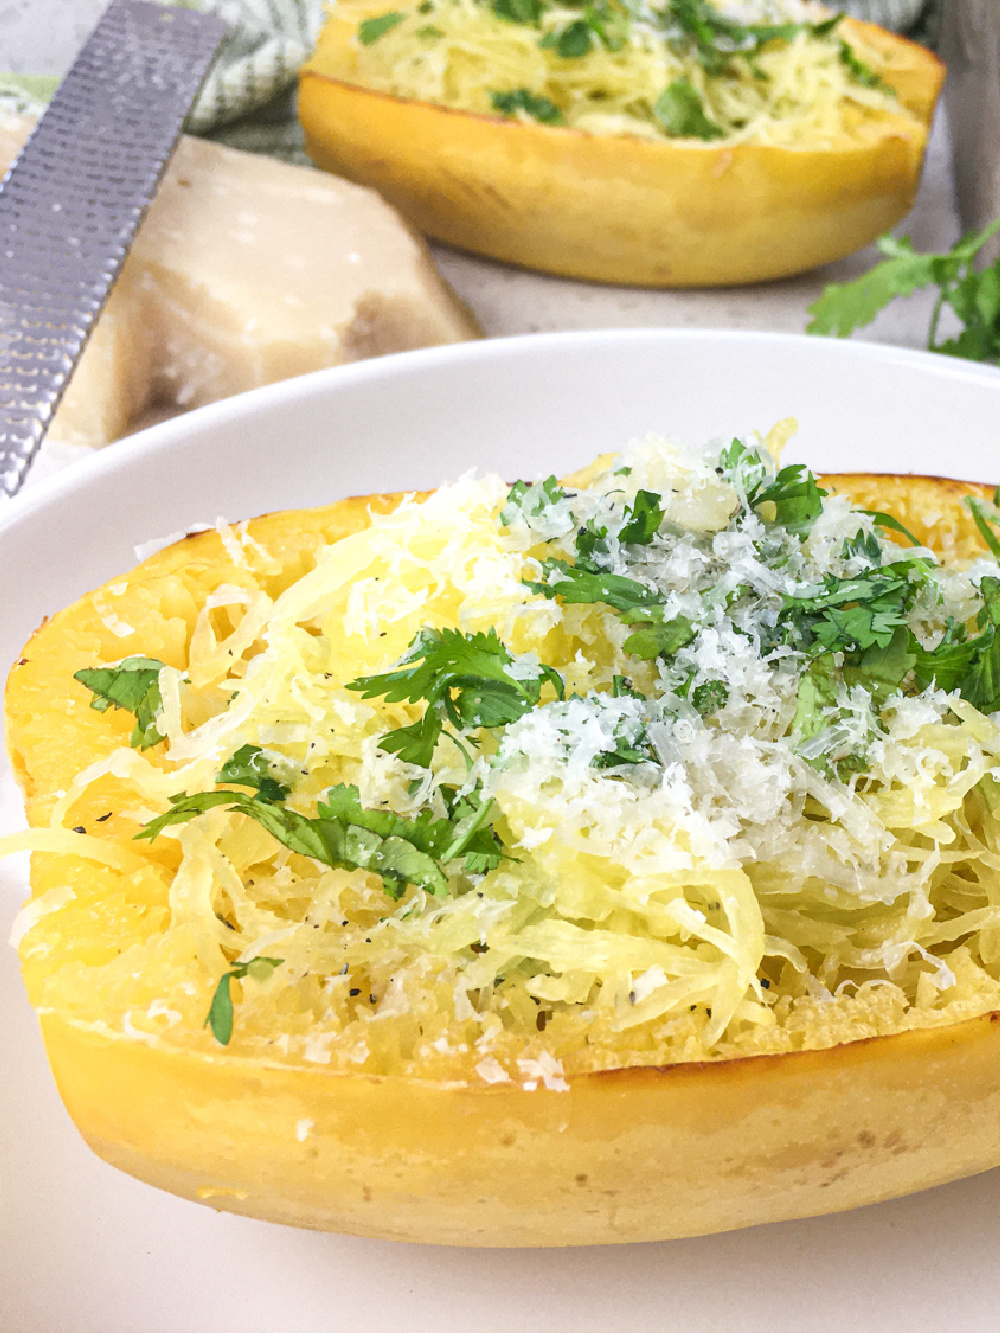 Roasted Spaghetti Squash with Parmesan Cheese